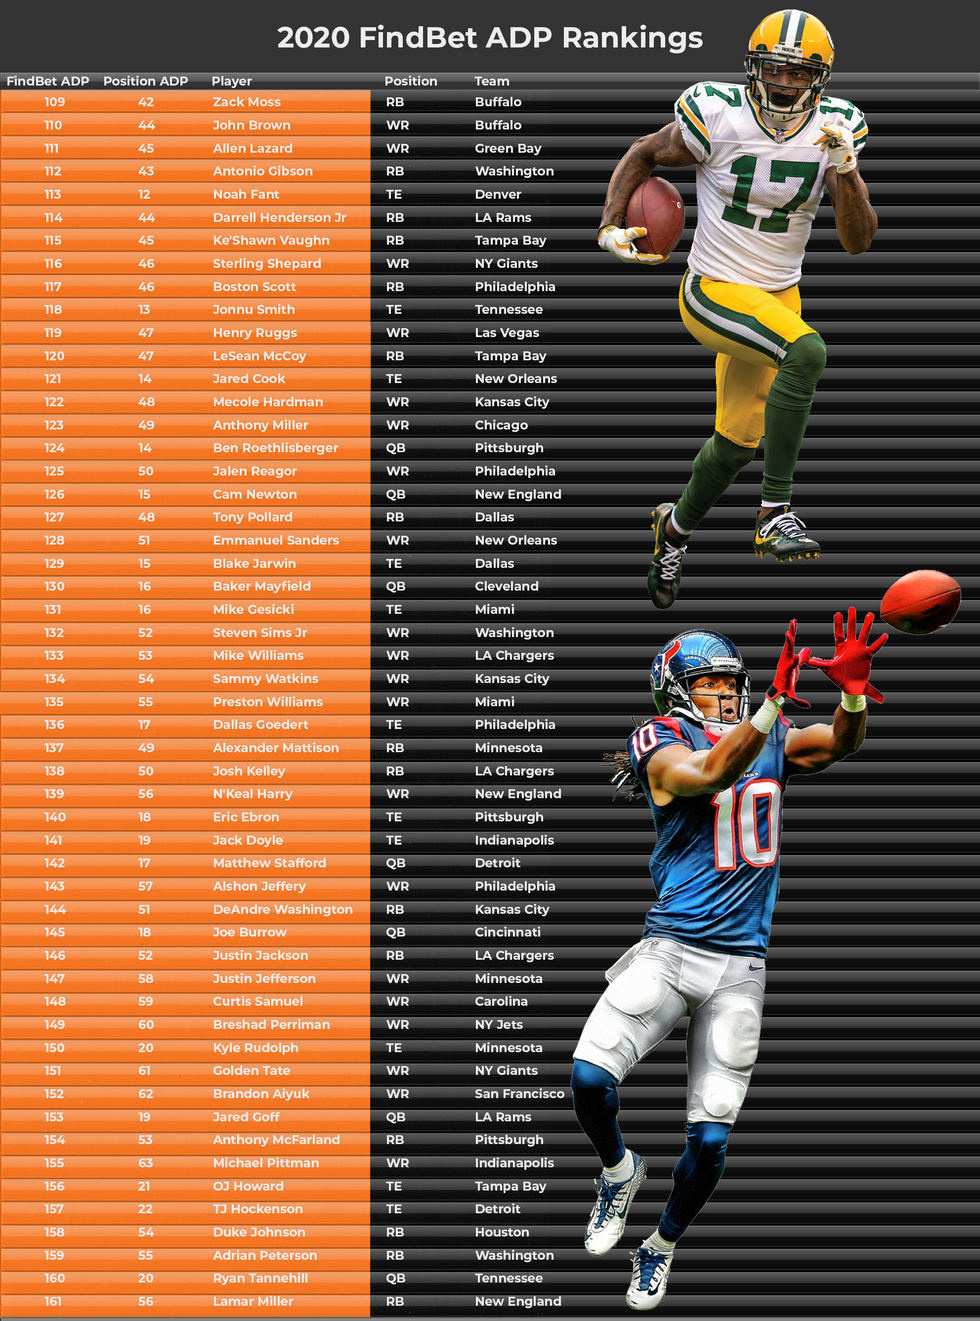 Fantasy Football ADP Rankings for 2020 Find Bet